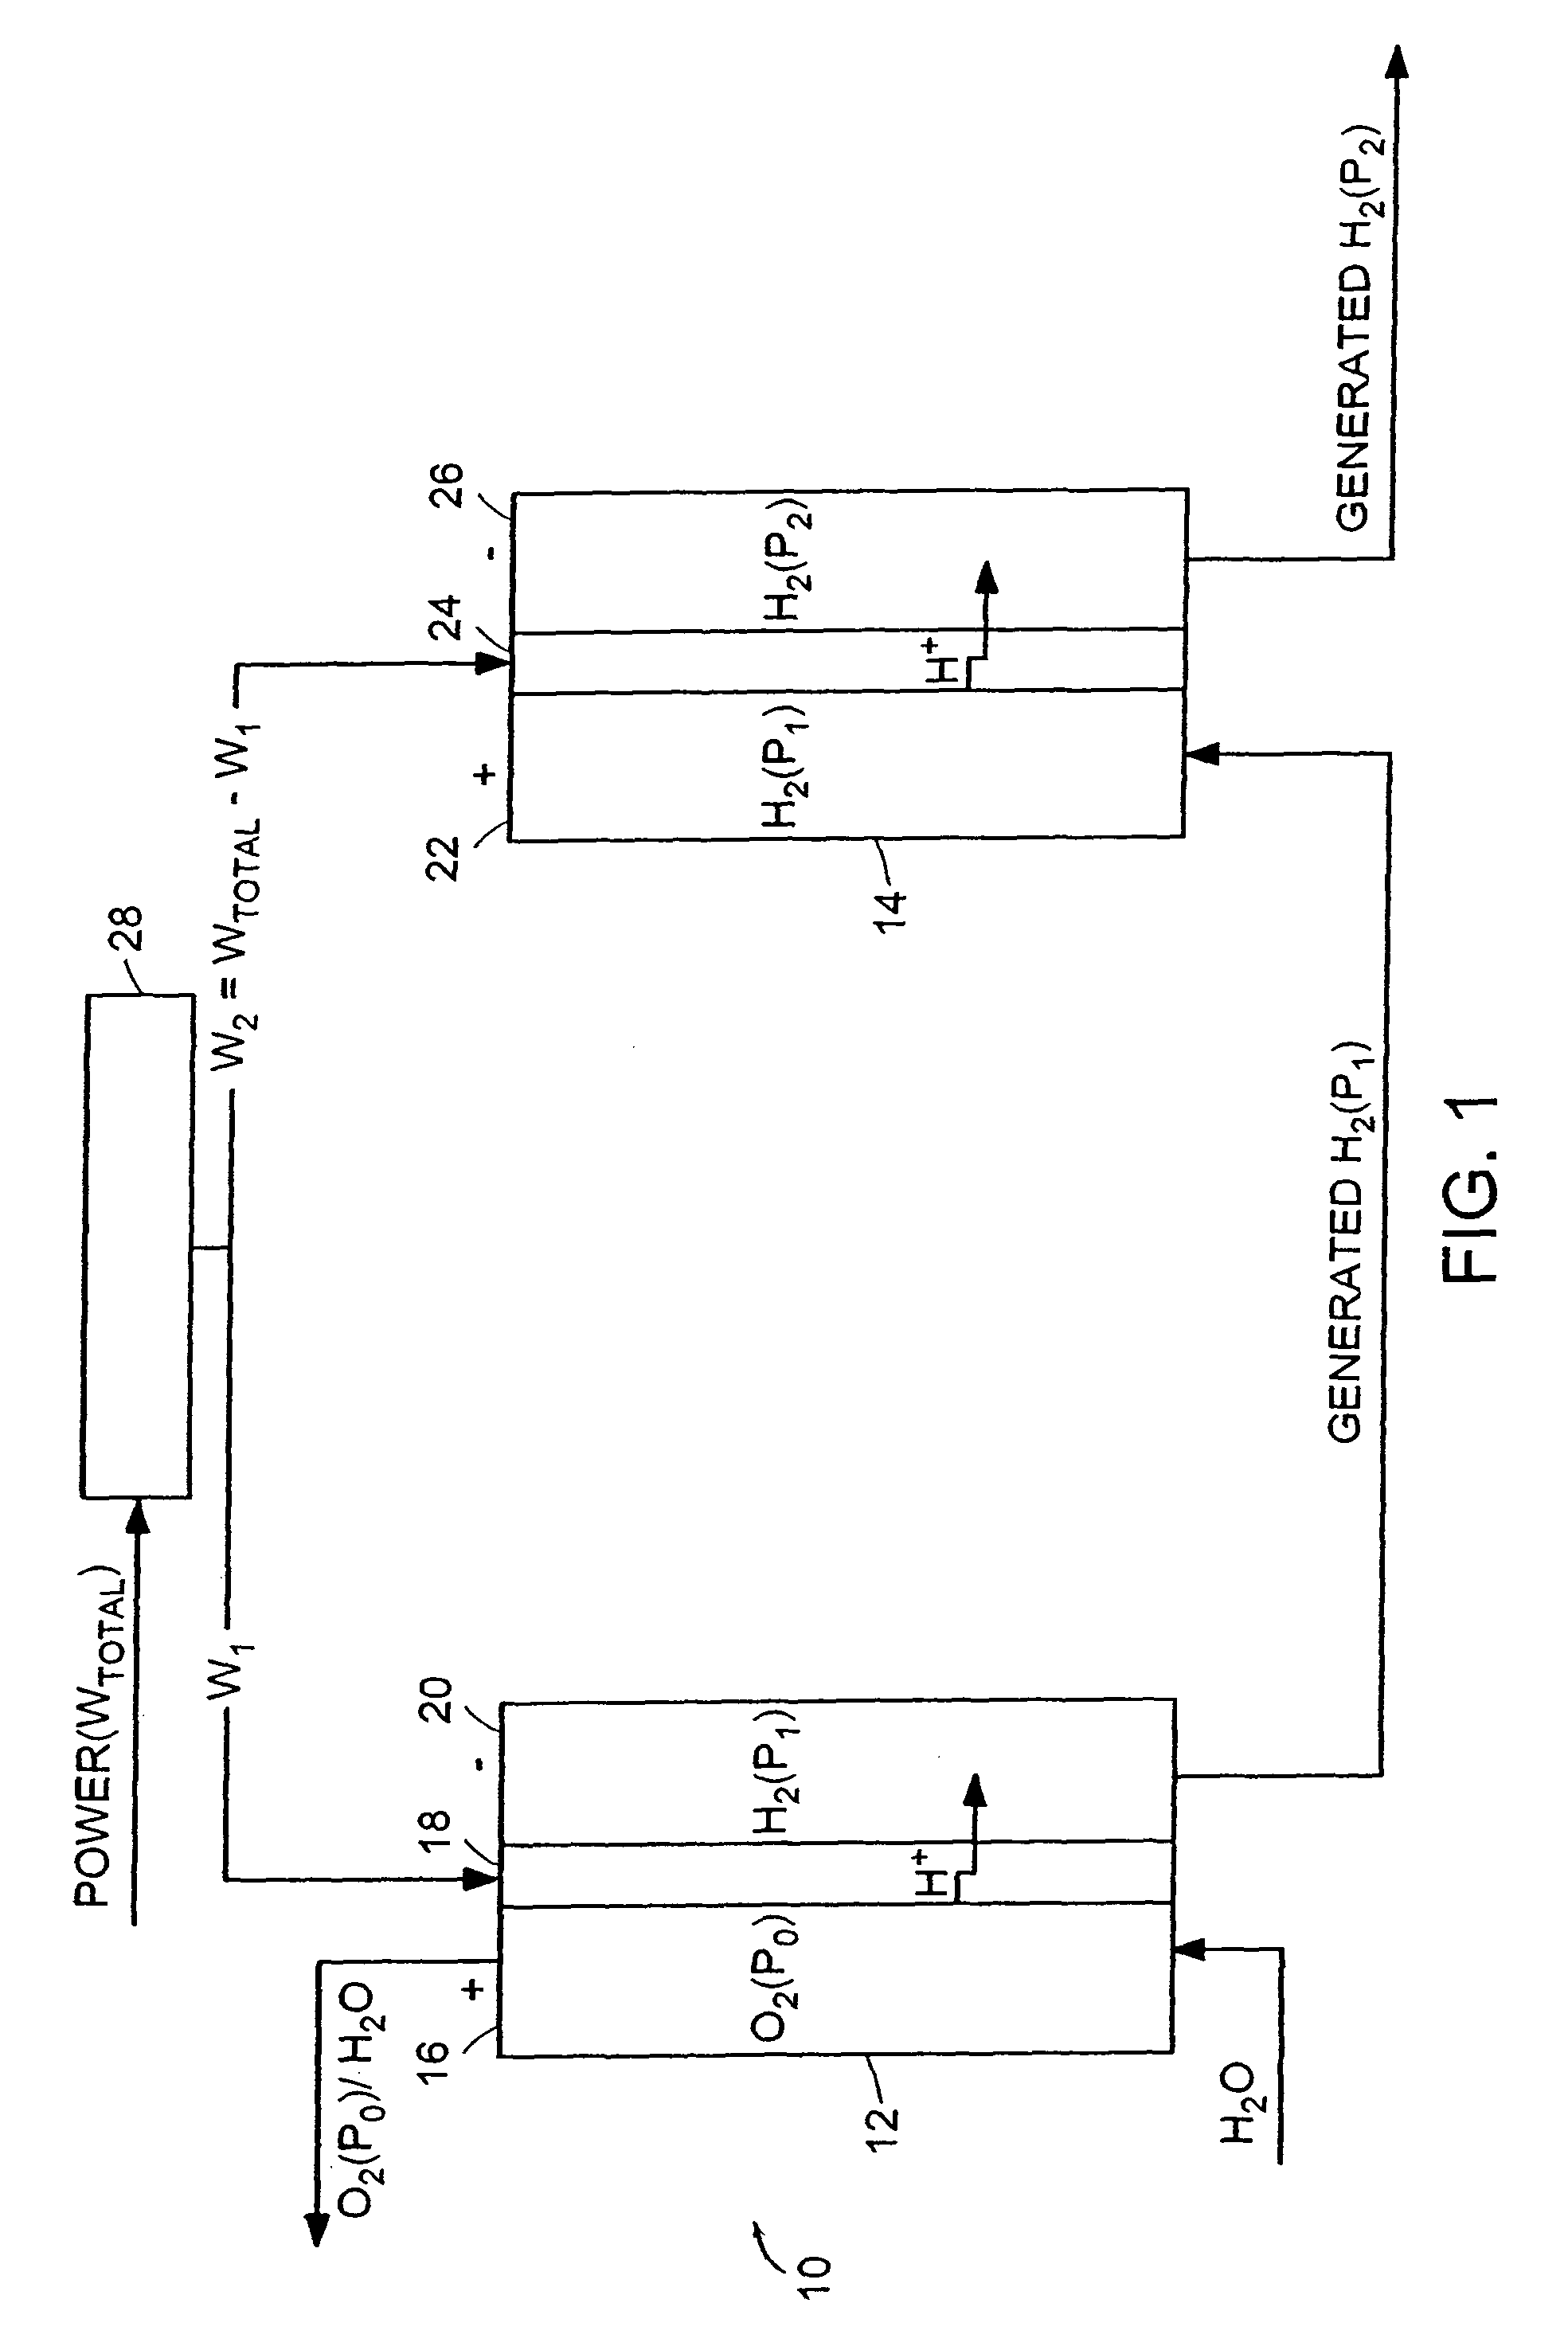 Method and system for producing high-pressure hydrogen